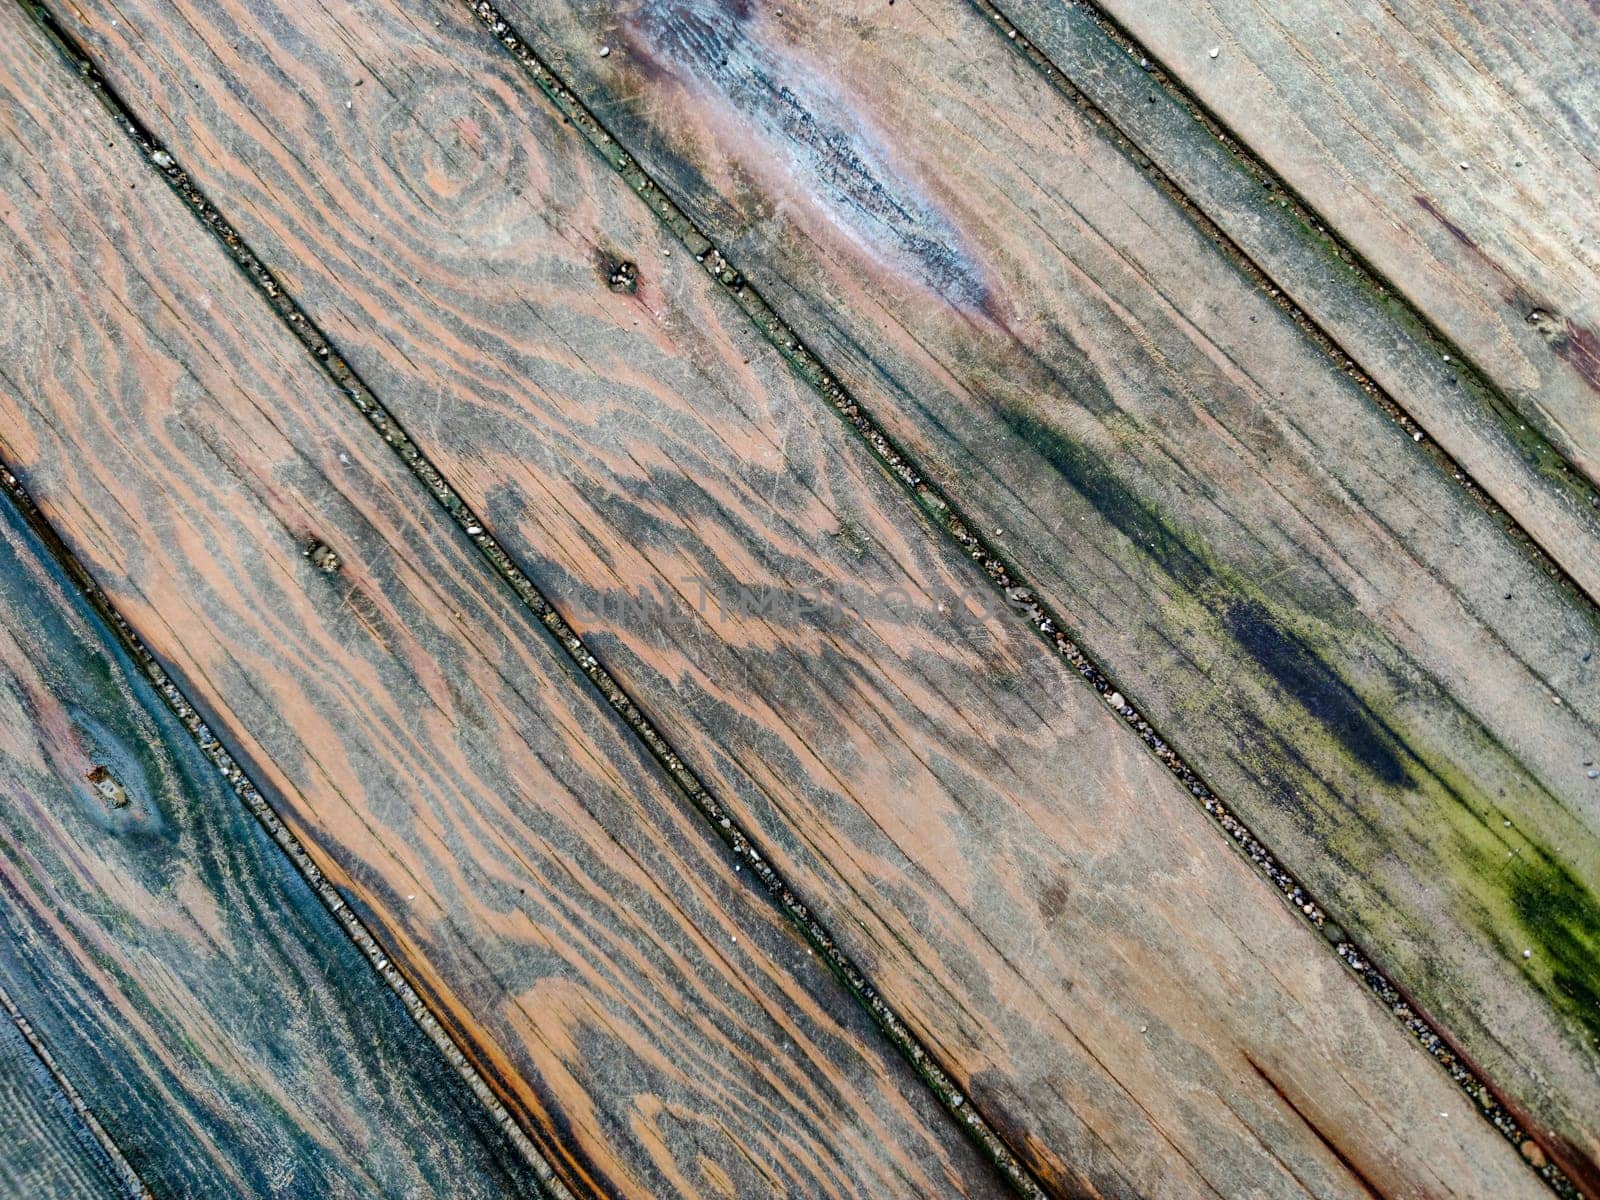 Surface of wooden boards with multicolored spots from dampness, diagonal lines, top view by Laguna781